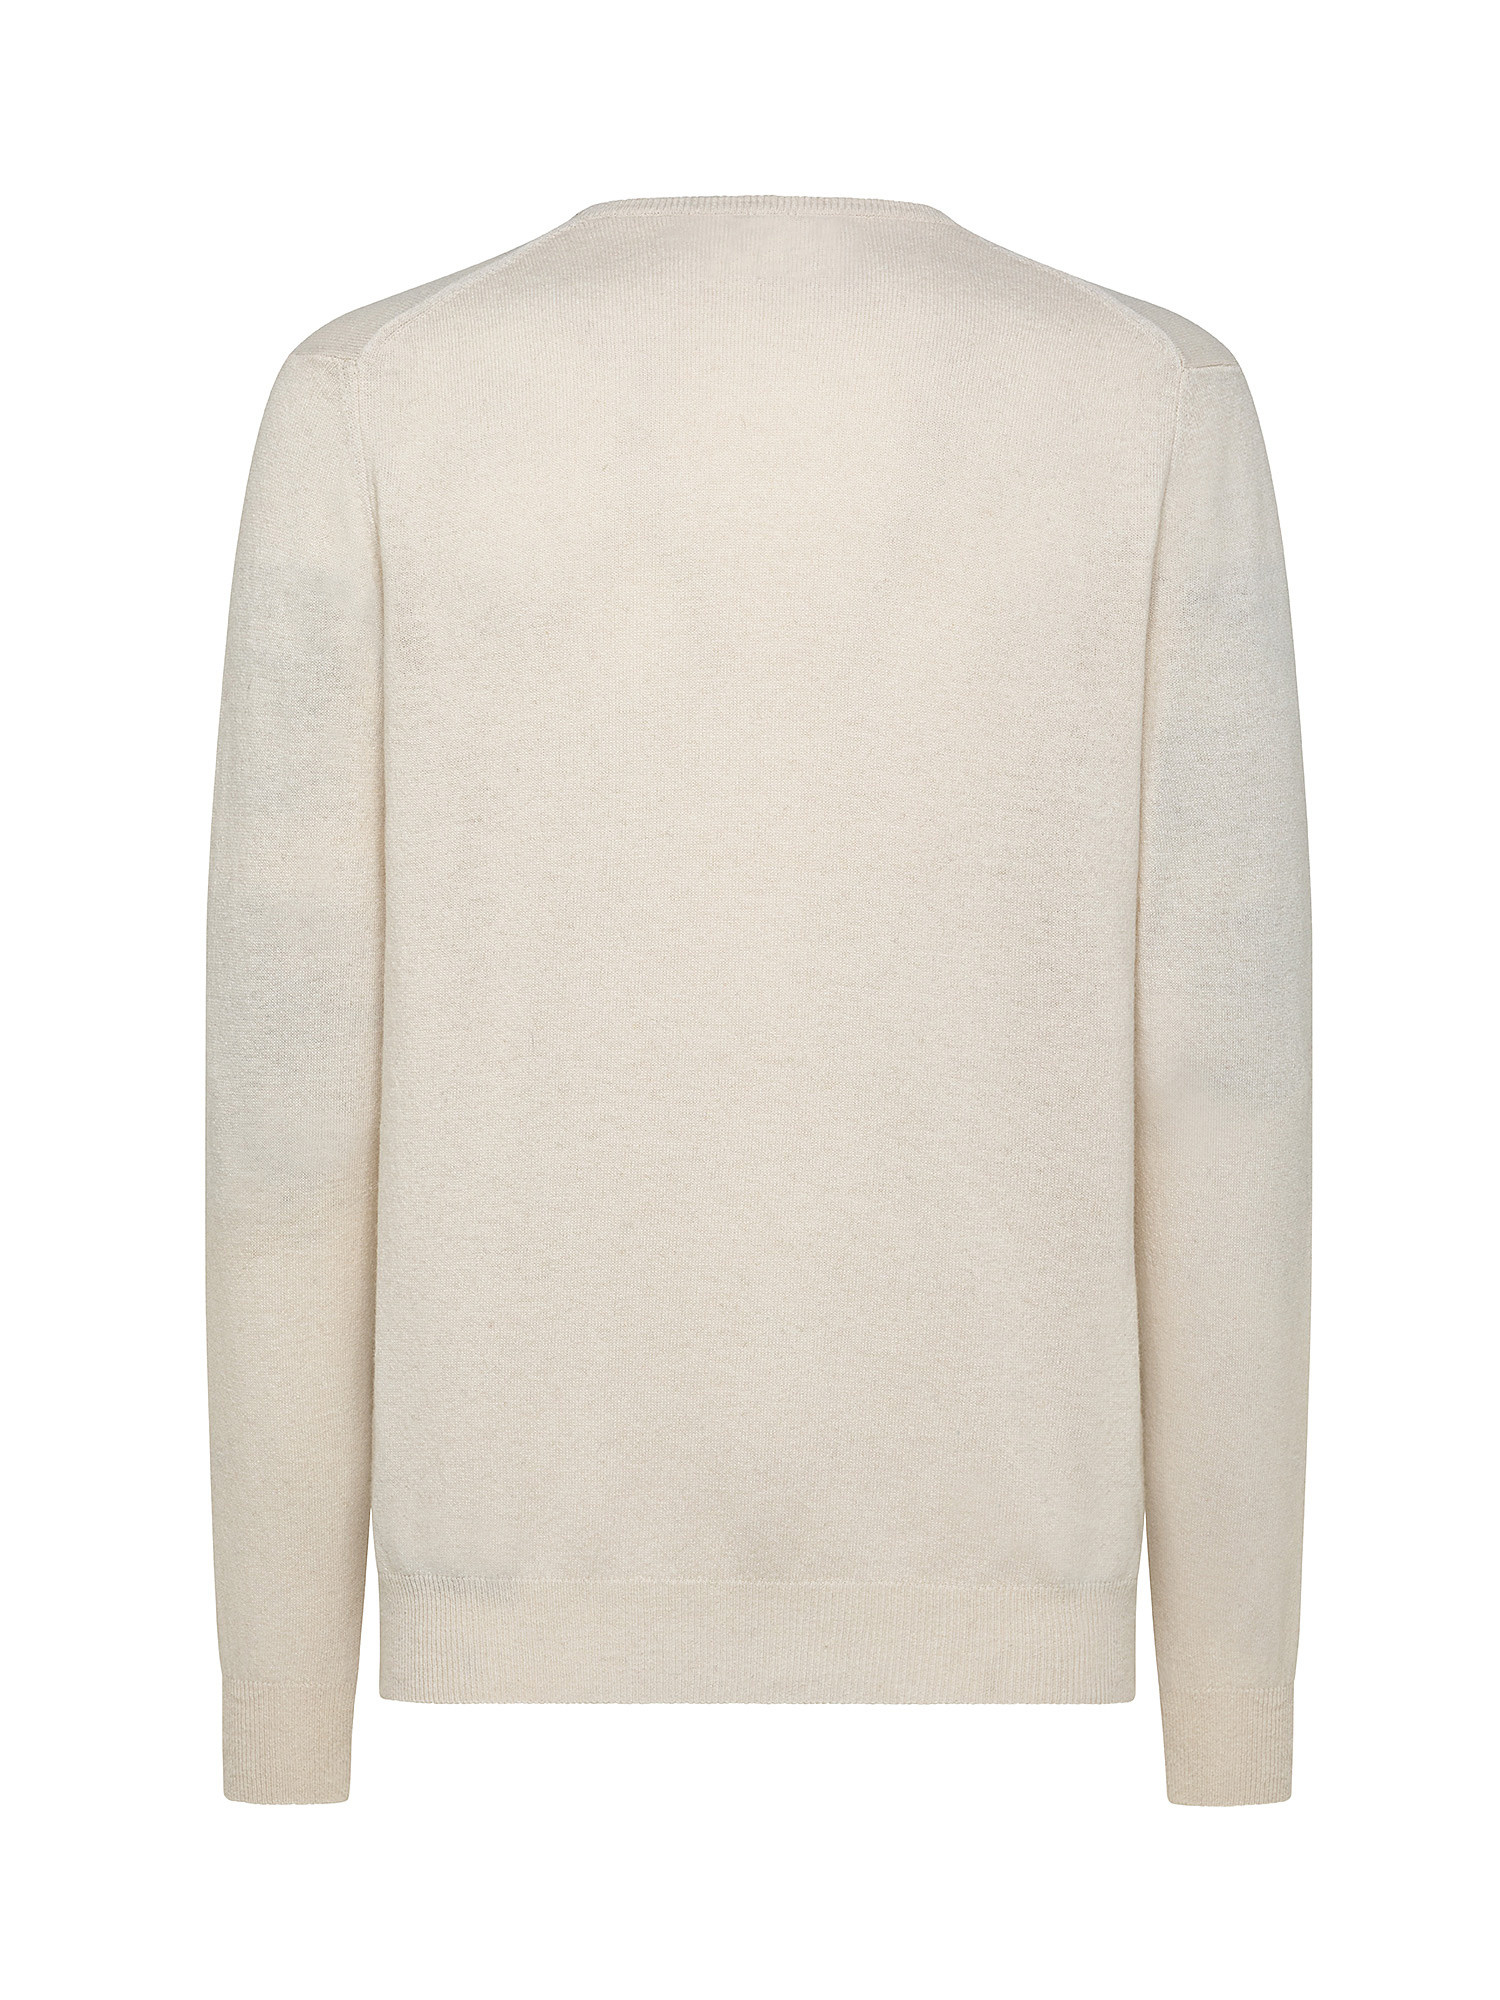 Cashmere Blend crewneck sweater with noble fibers, Off White, large image number 1